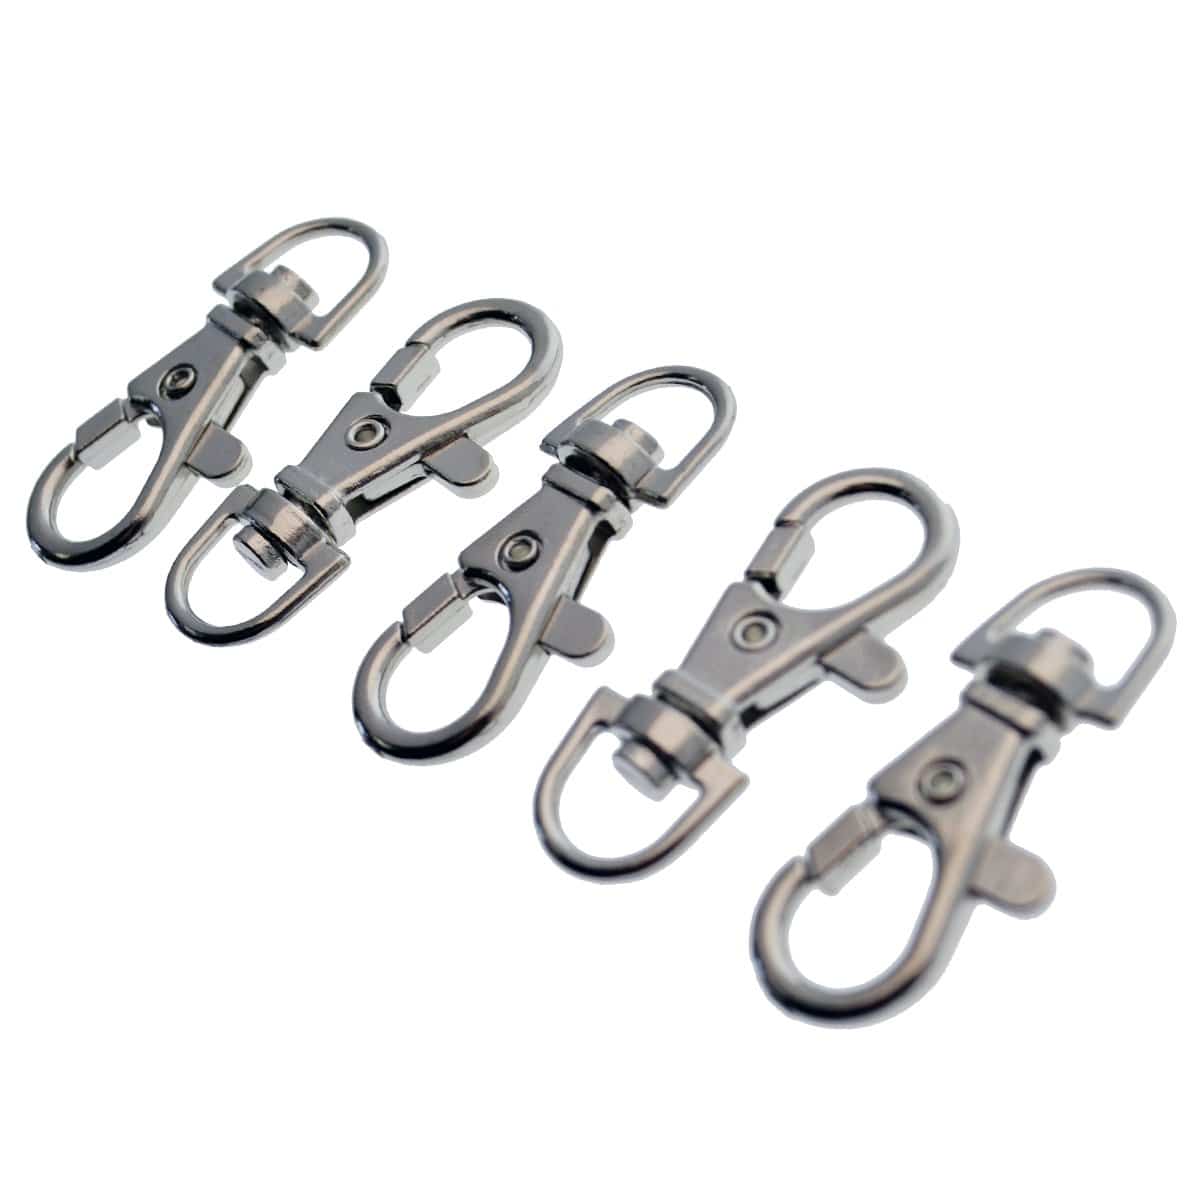 50 Pack Metal Swivel Lobster Claw Clasp Lanyard Snap Hook 1.25” x 0.5” with  50 Key Rings - Jewelry Findings Or Sewing Projects 